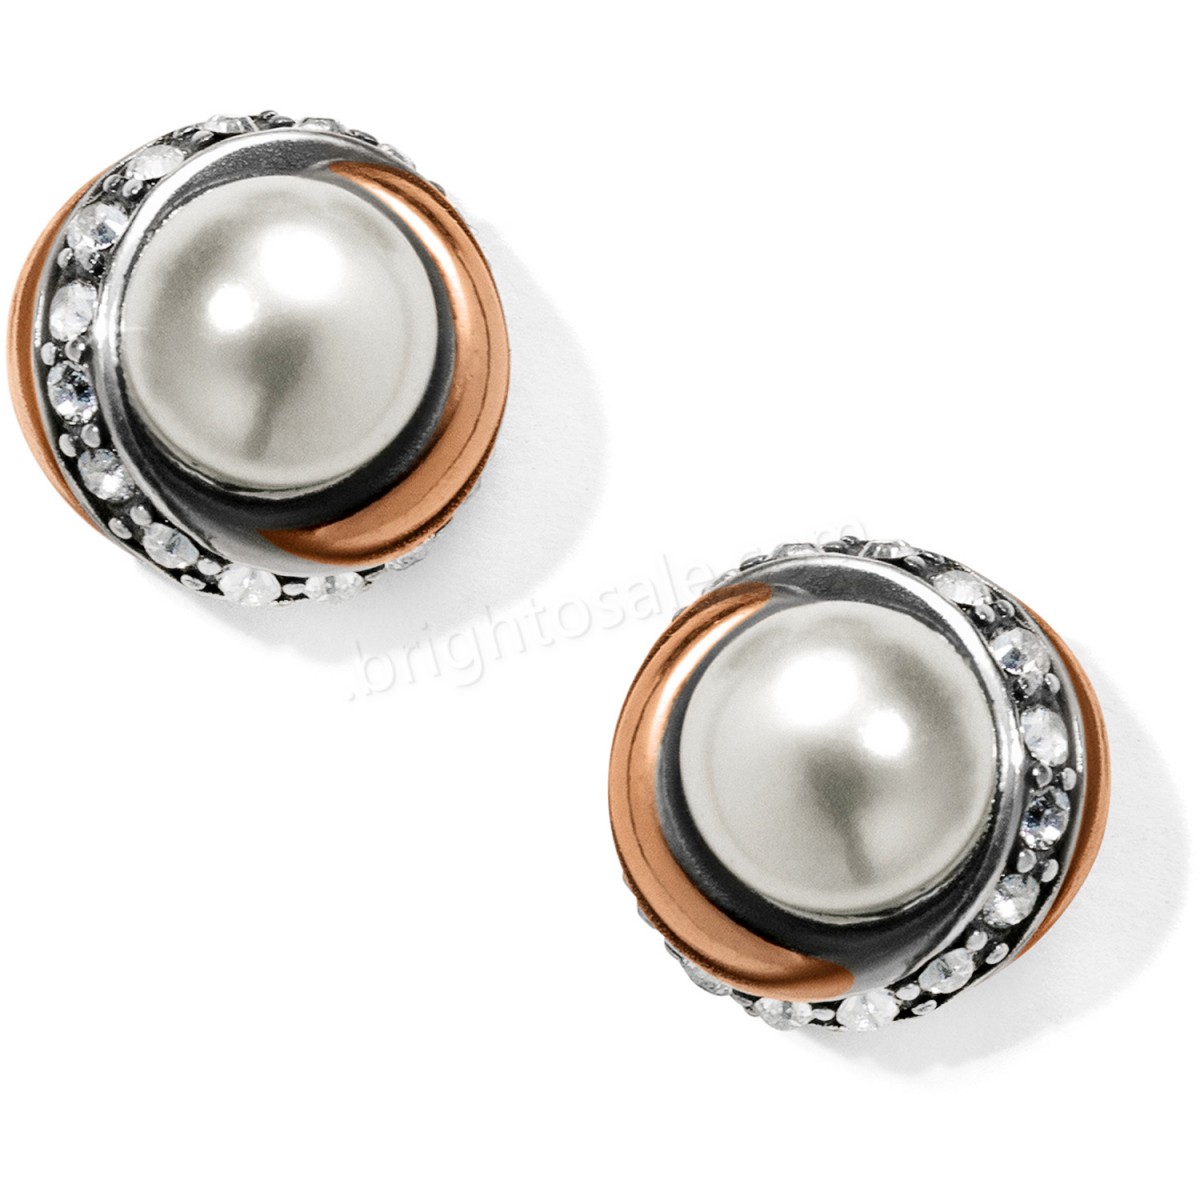 Brighton Collectibles & Online Discount Neptune's Rings Pearl Button Earrings - -0